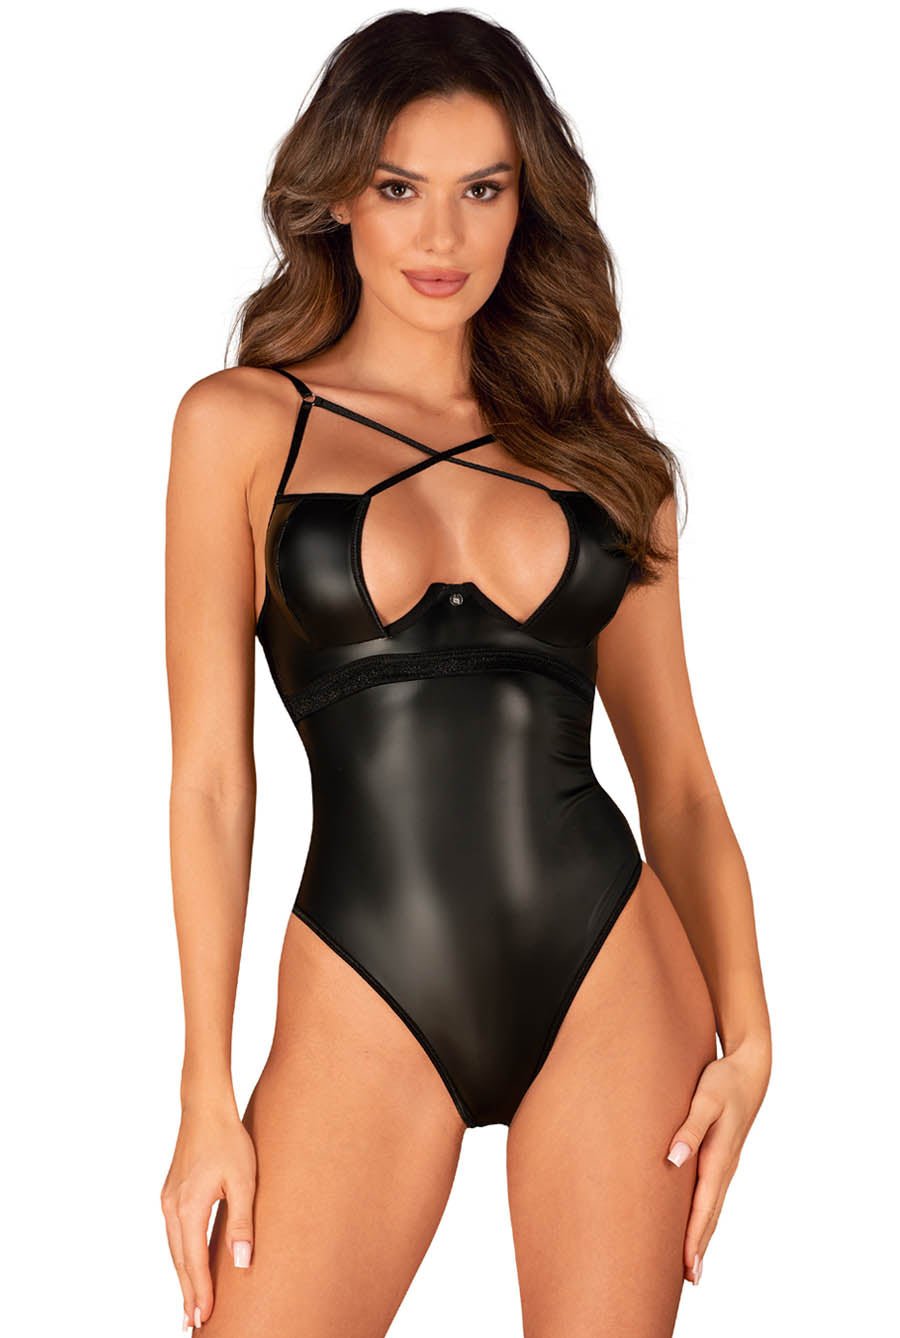 leather womens lingerie